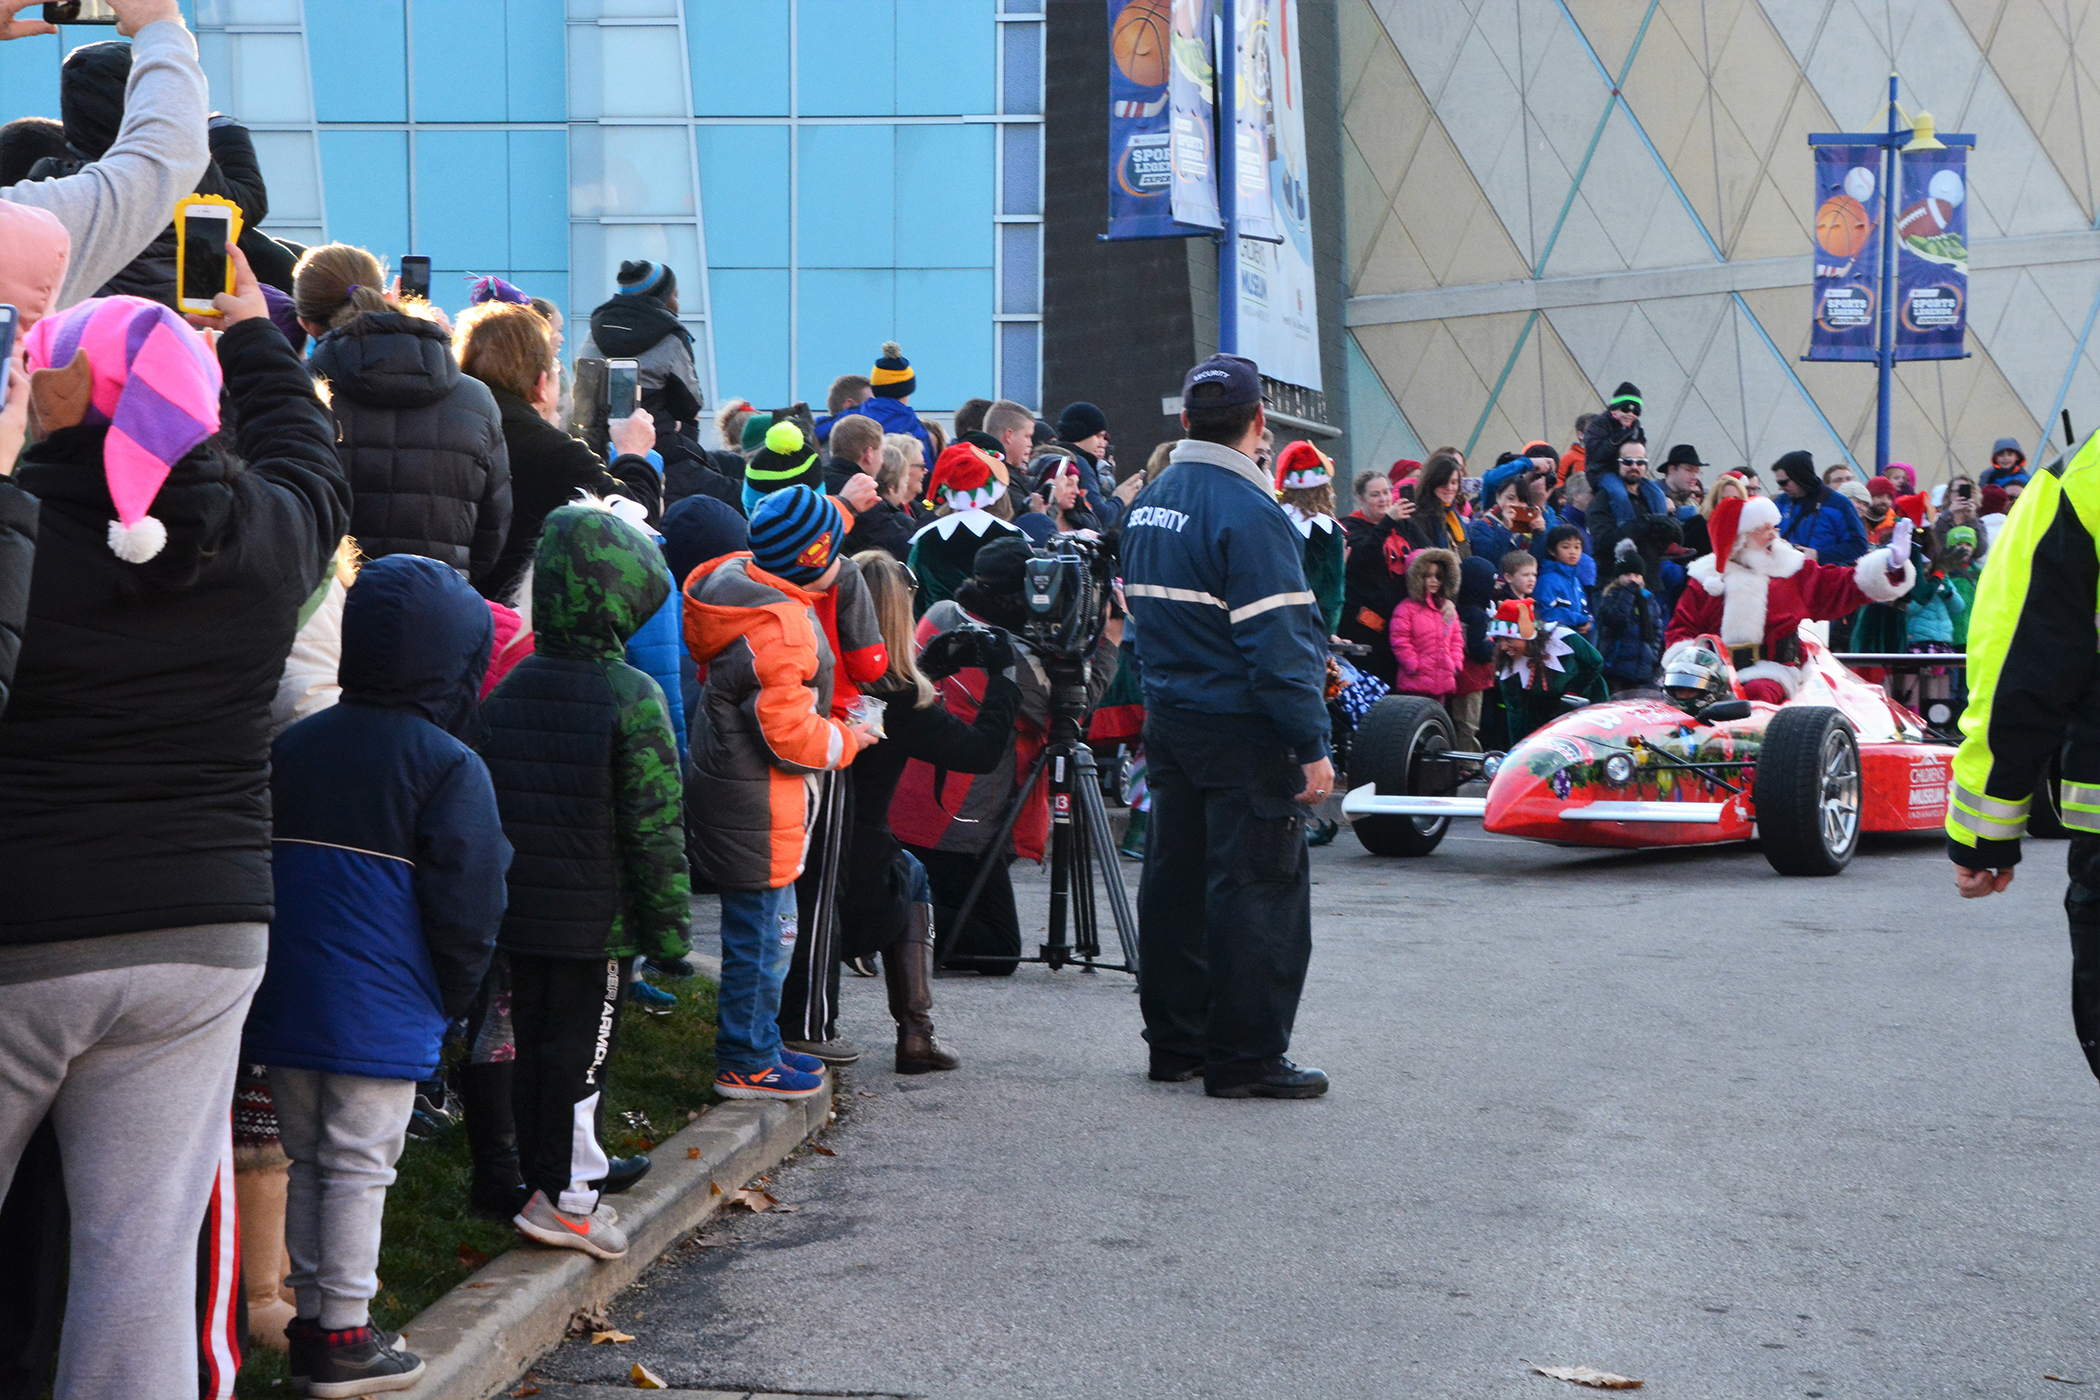 Zoom zoom Santa!  Free hot cocoa kept good little boys and girls toasty as they waited for Santa to zoom in to the world's largest children's museum in a race car!  Santa's Big Arrival at The Children